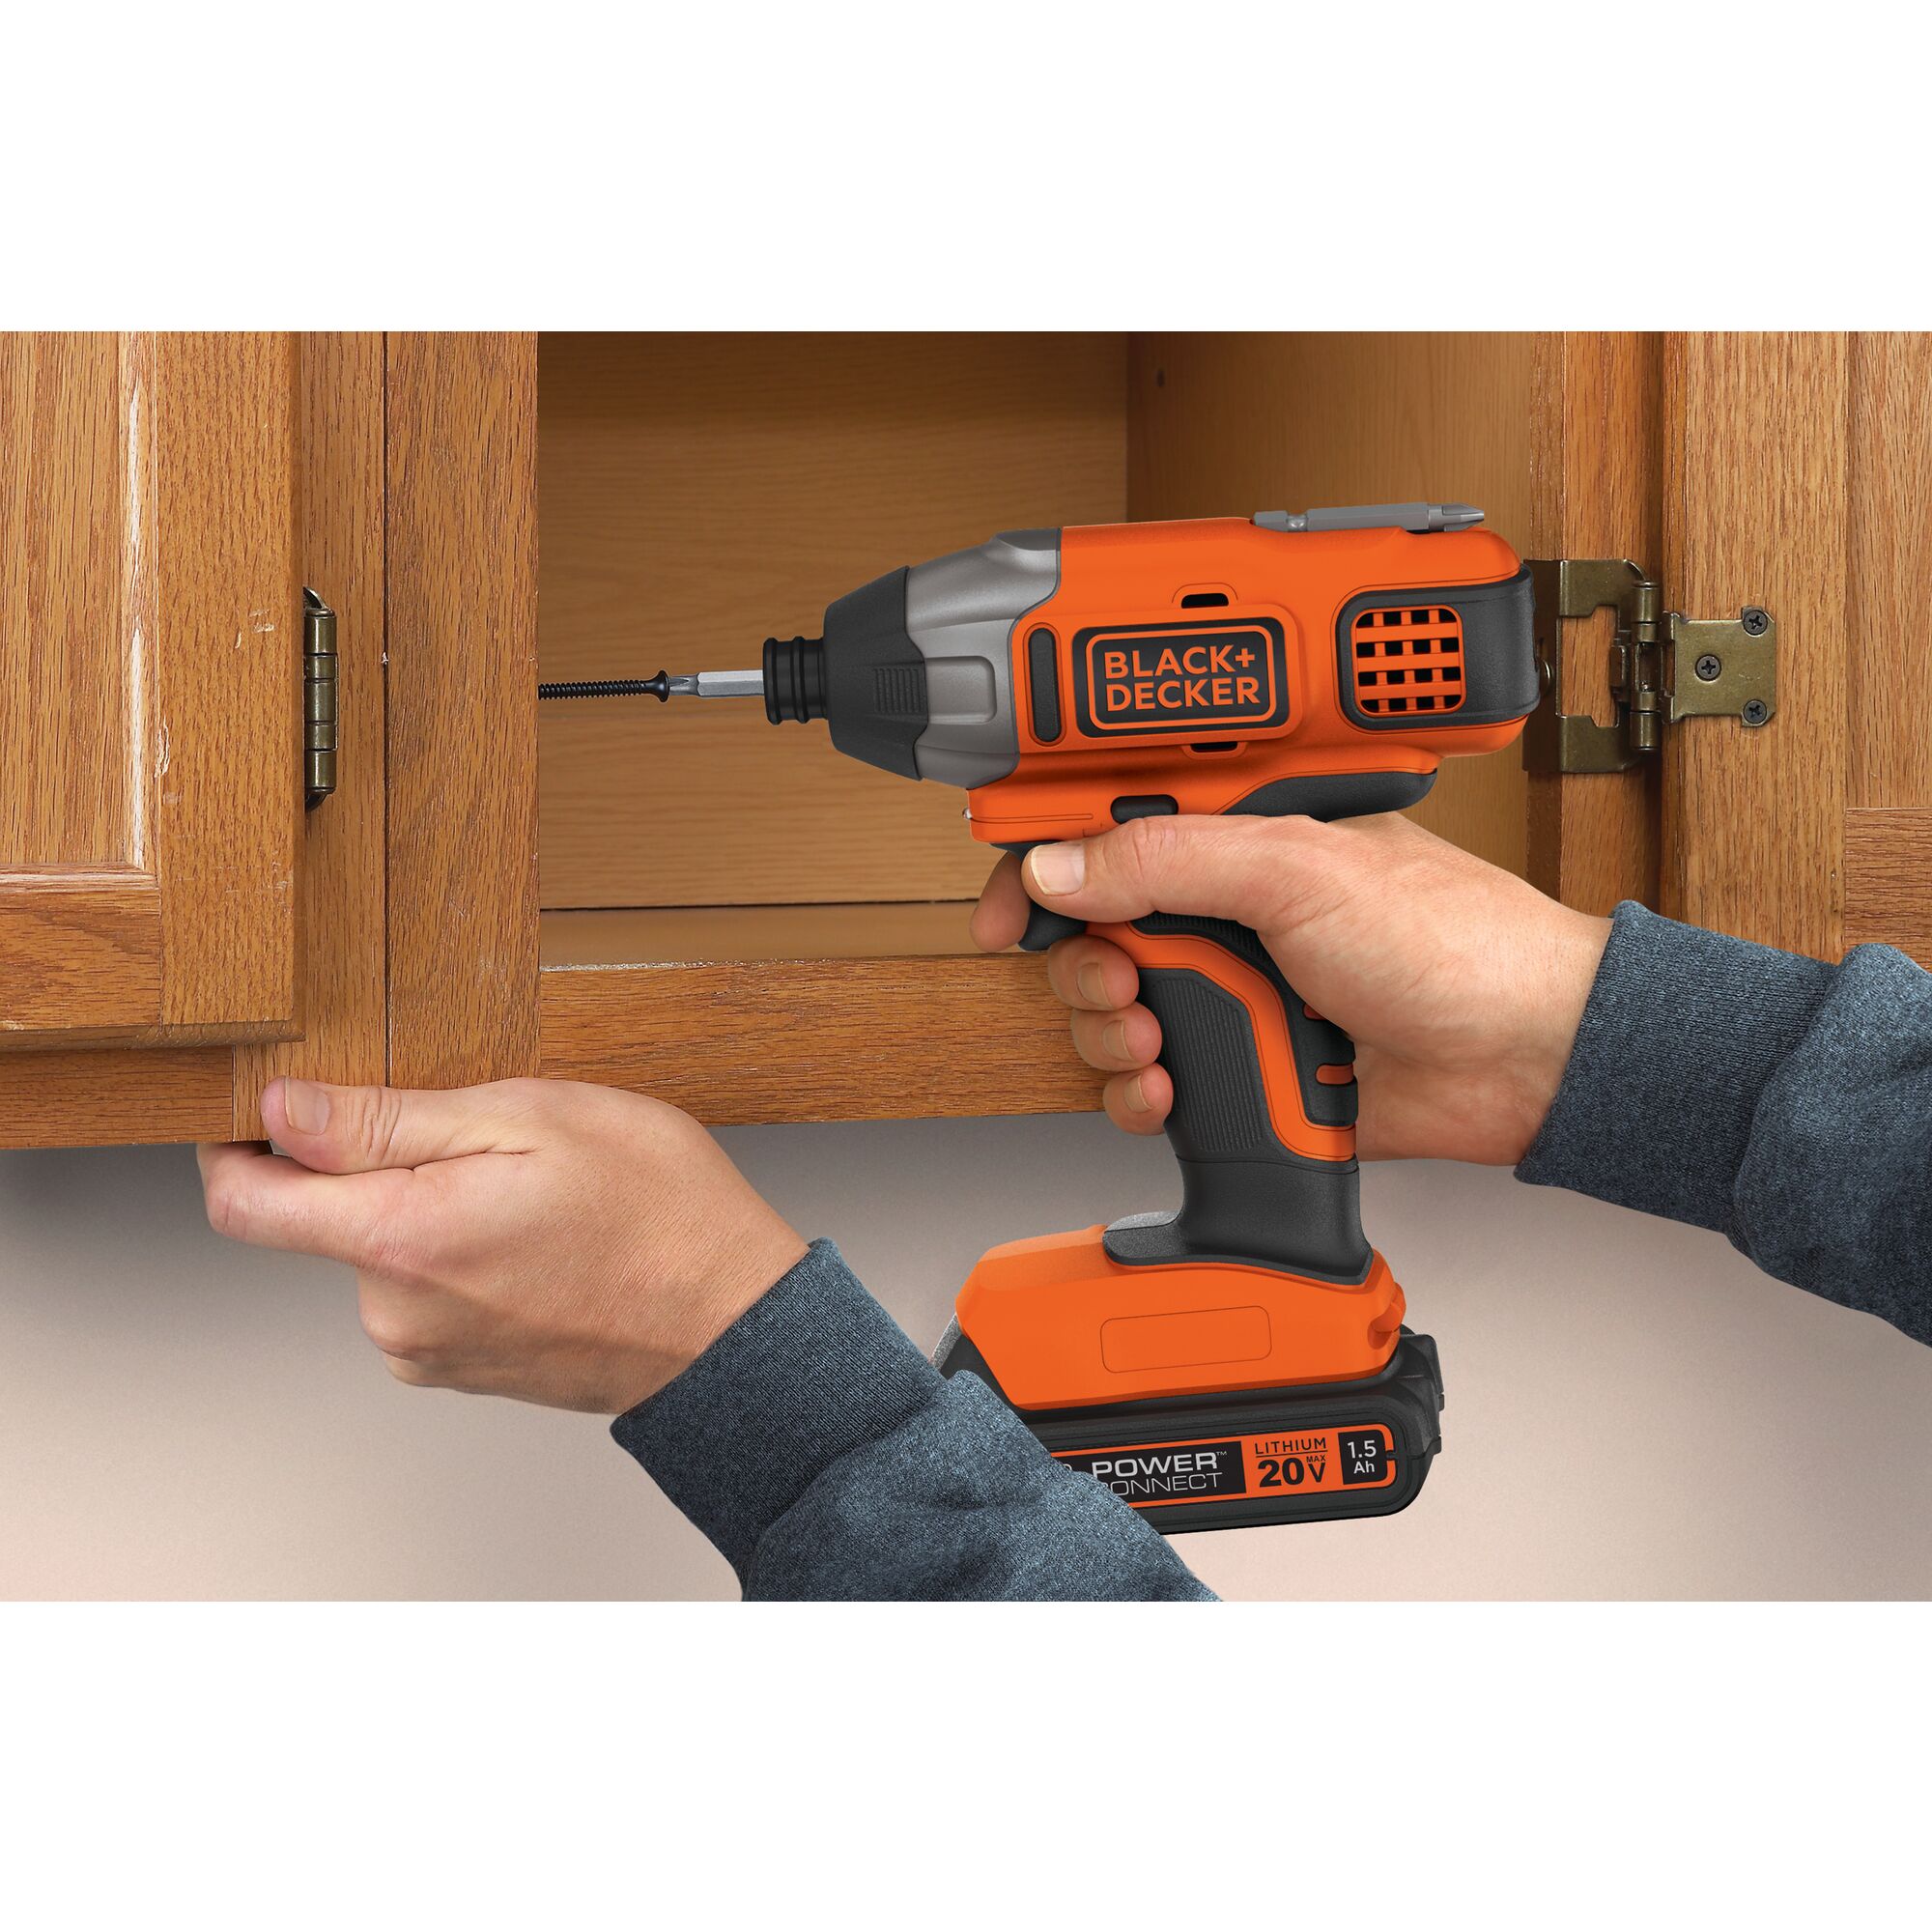 Lithium Impact Driver being used for screwing nail in wooden cabinet.